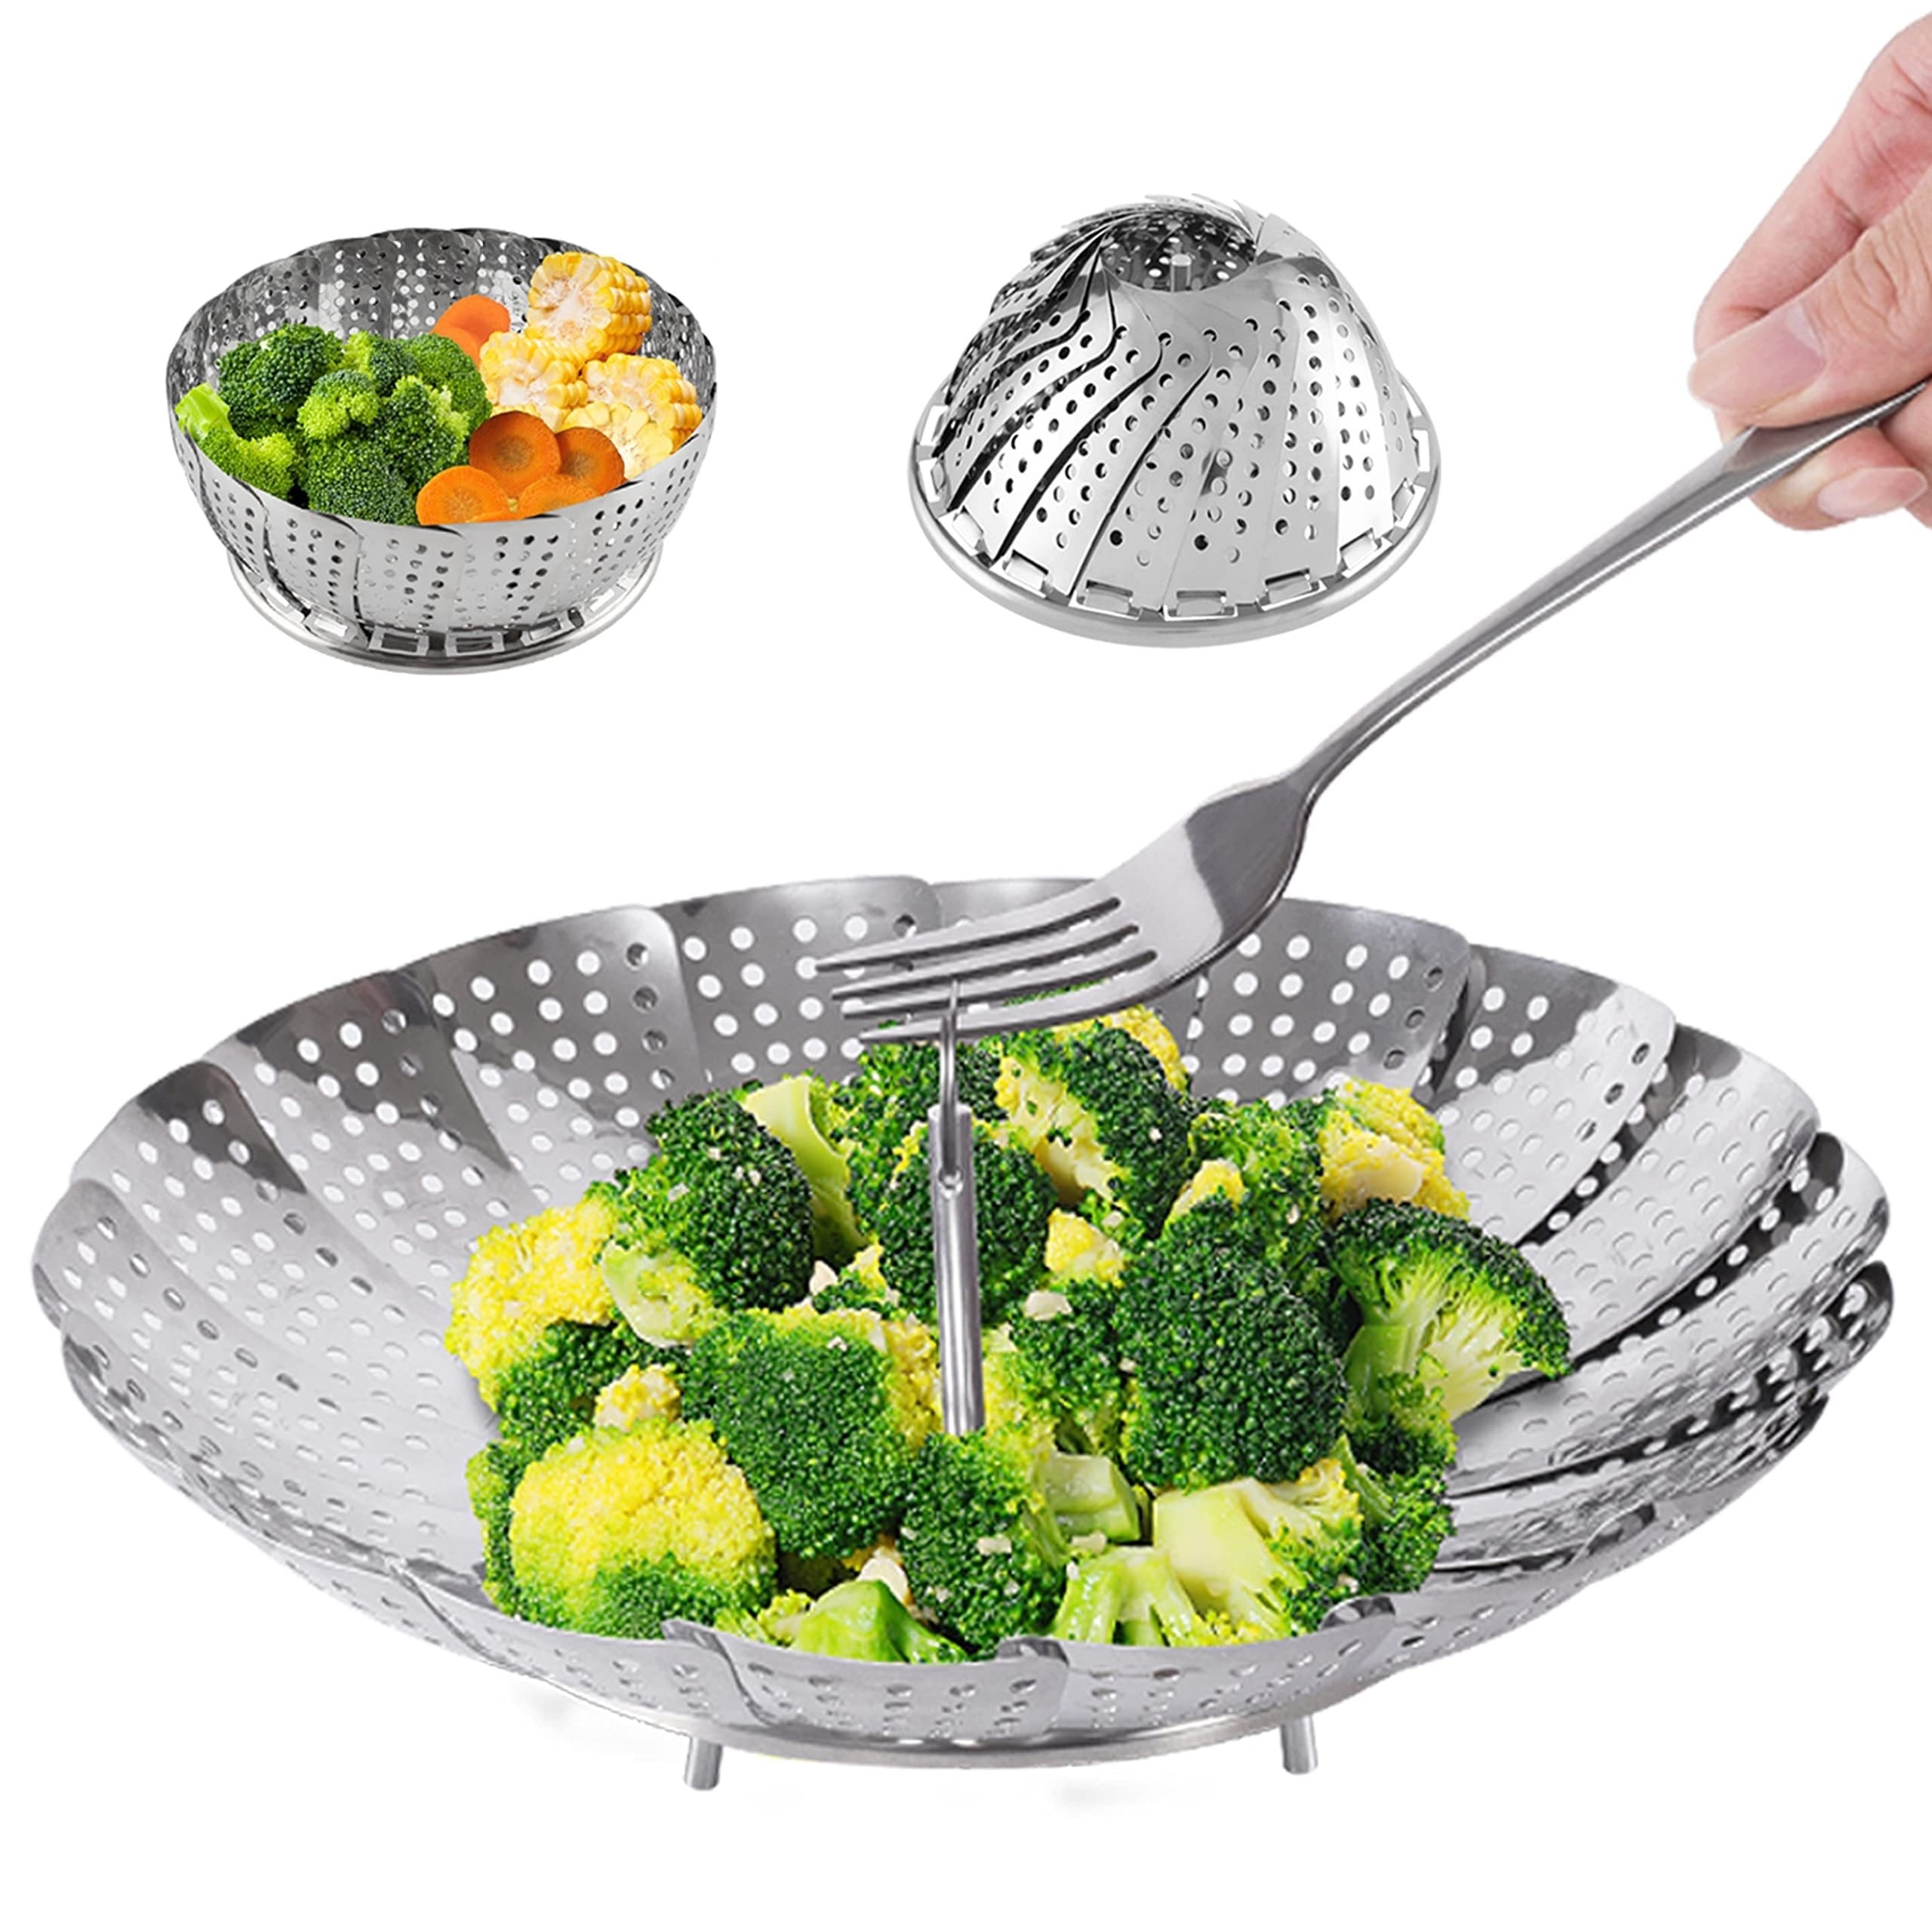 Vegetable Steamer Basket, Stainless Steel Folding Steamer Basket Insert for Veggie Fish Seafood Cooking, Expandable to Fit Various Size Pot (5.1 to